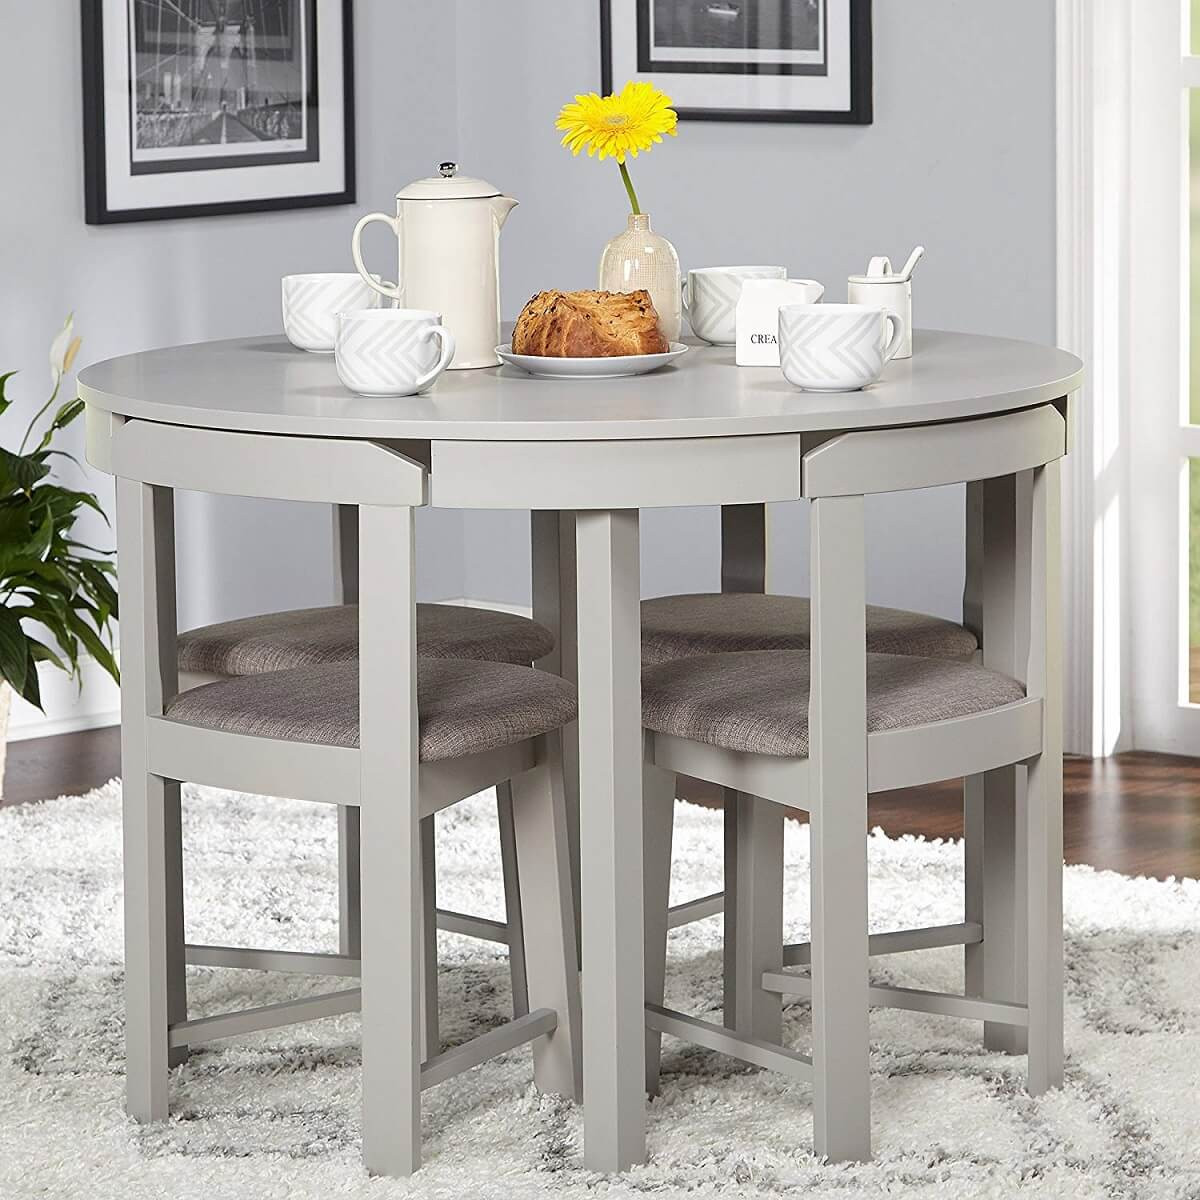 Small Kitchen Table
 19 Small Kitchen Tables For Conserving Space • Insteading